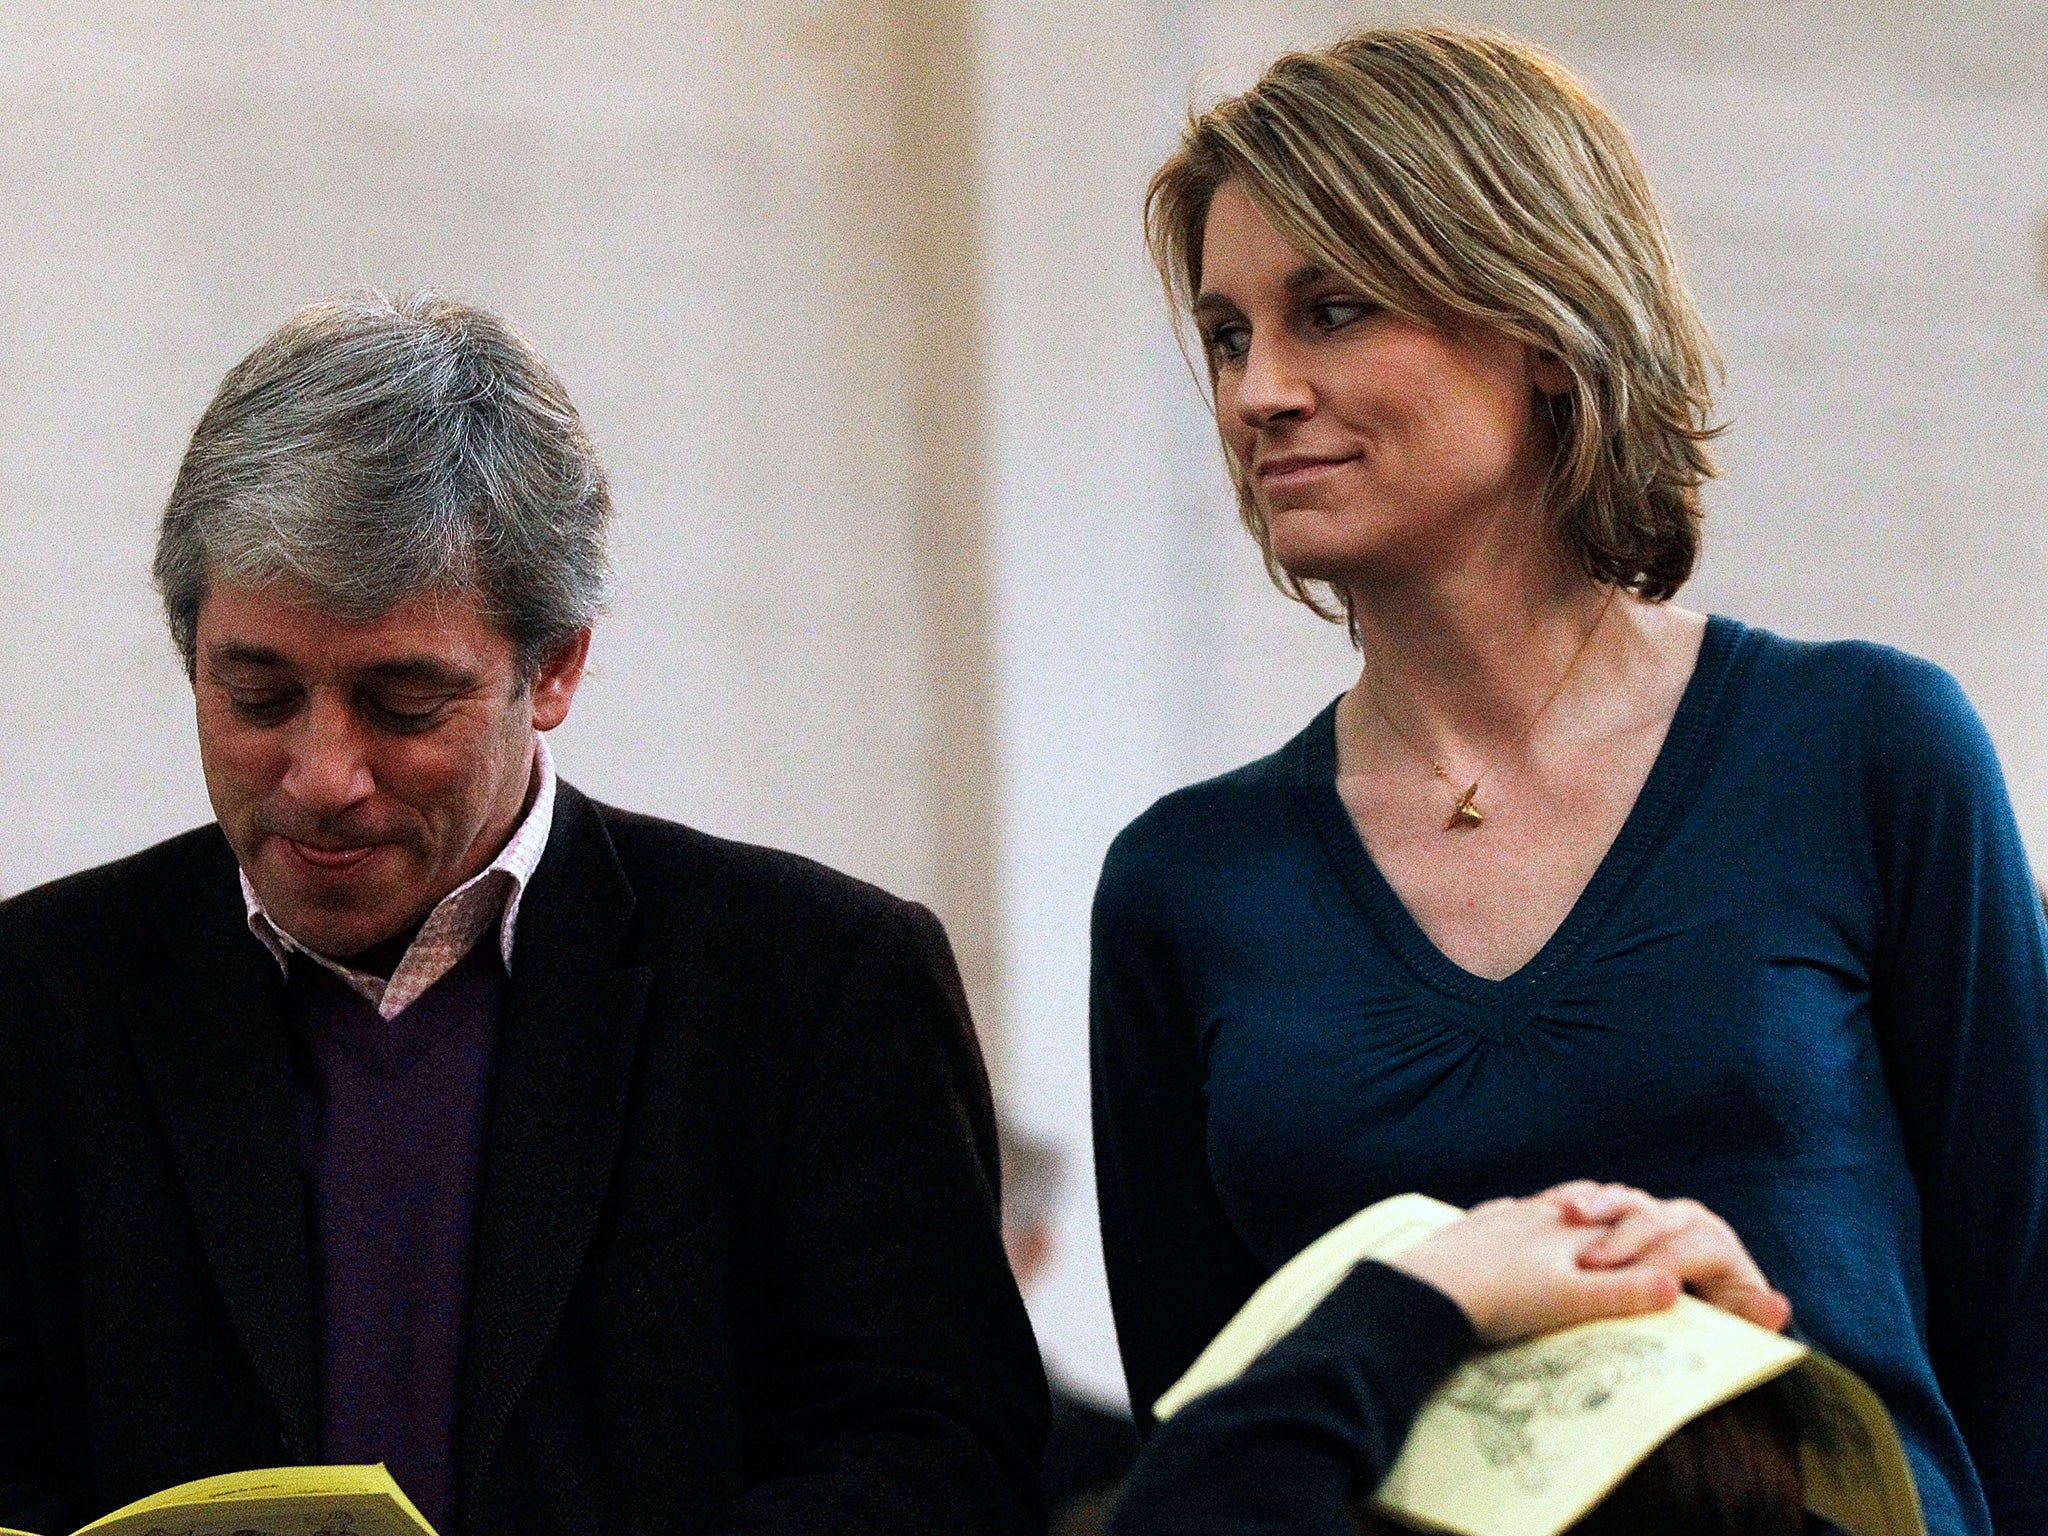 Sally Bercow is said to have started a relationship with Alan Bercow, cousin of John, at the start of the election campaign